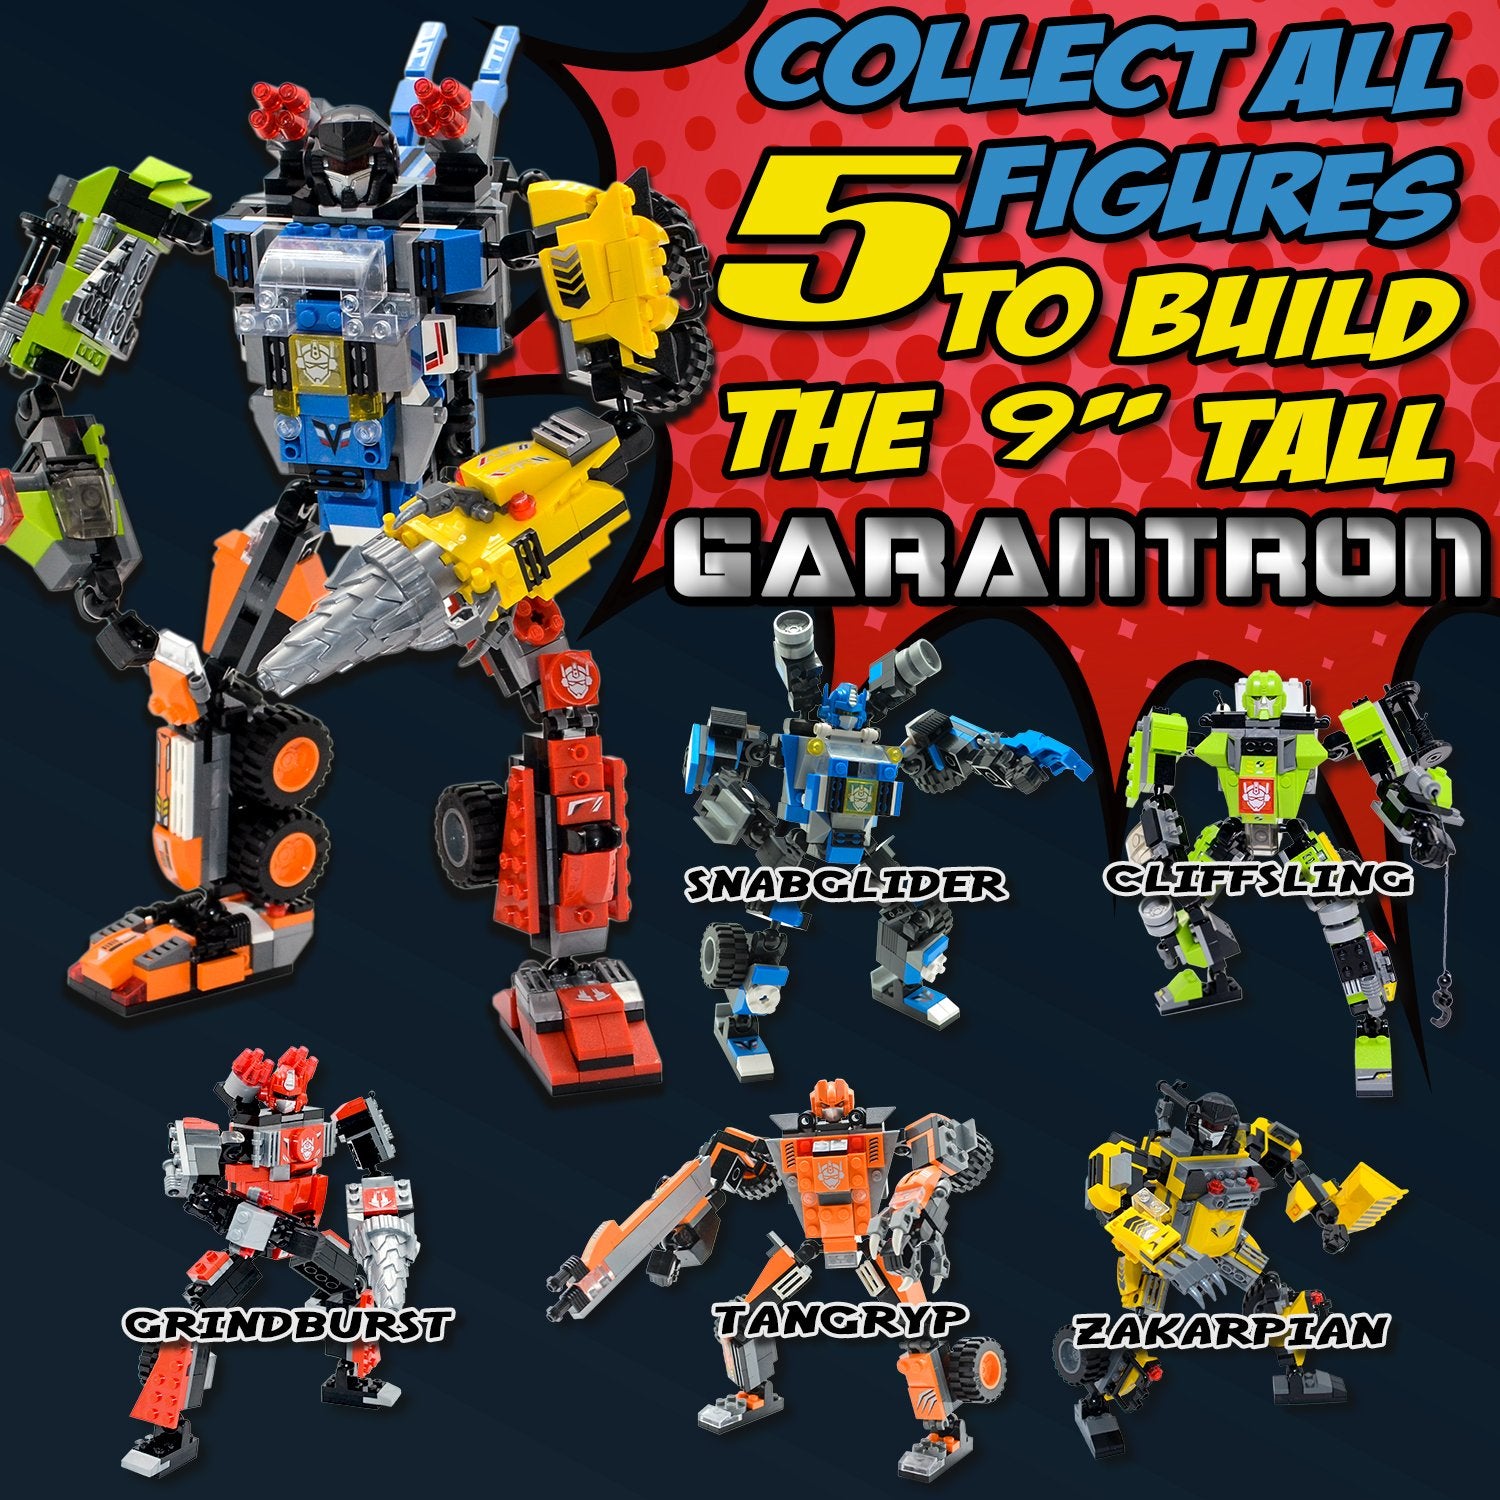 Robot STEM Toy Figure | 3 in 1 Fun Creative Set | Construction Building Toys for Boys and Girls Ages 6-14 Years Old | Best Toy Gift for Kids | Free Poster Kit Included